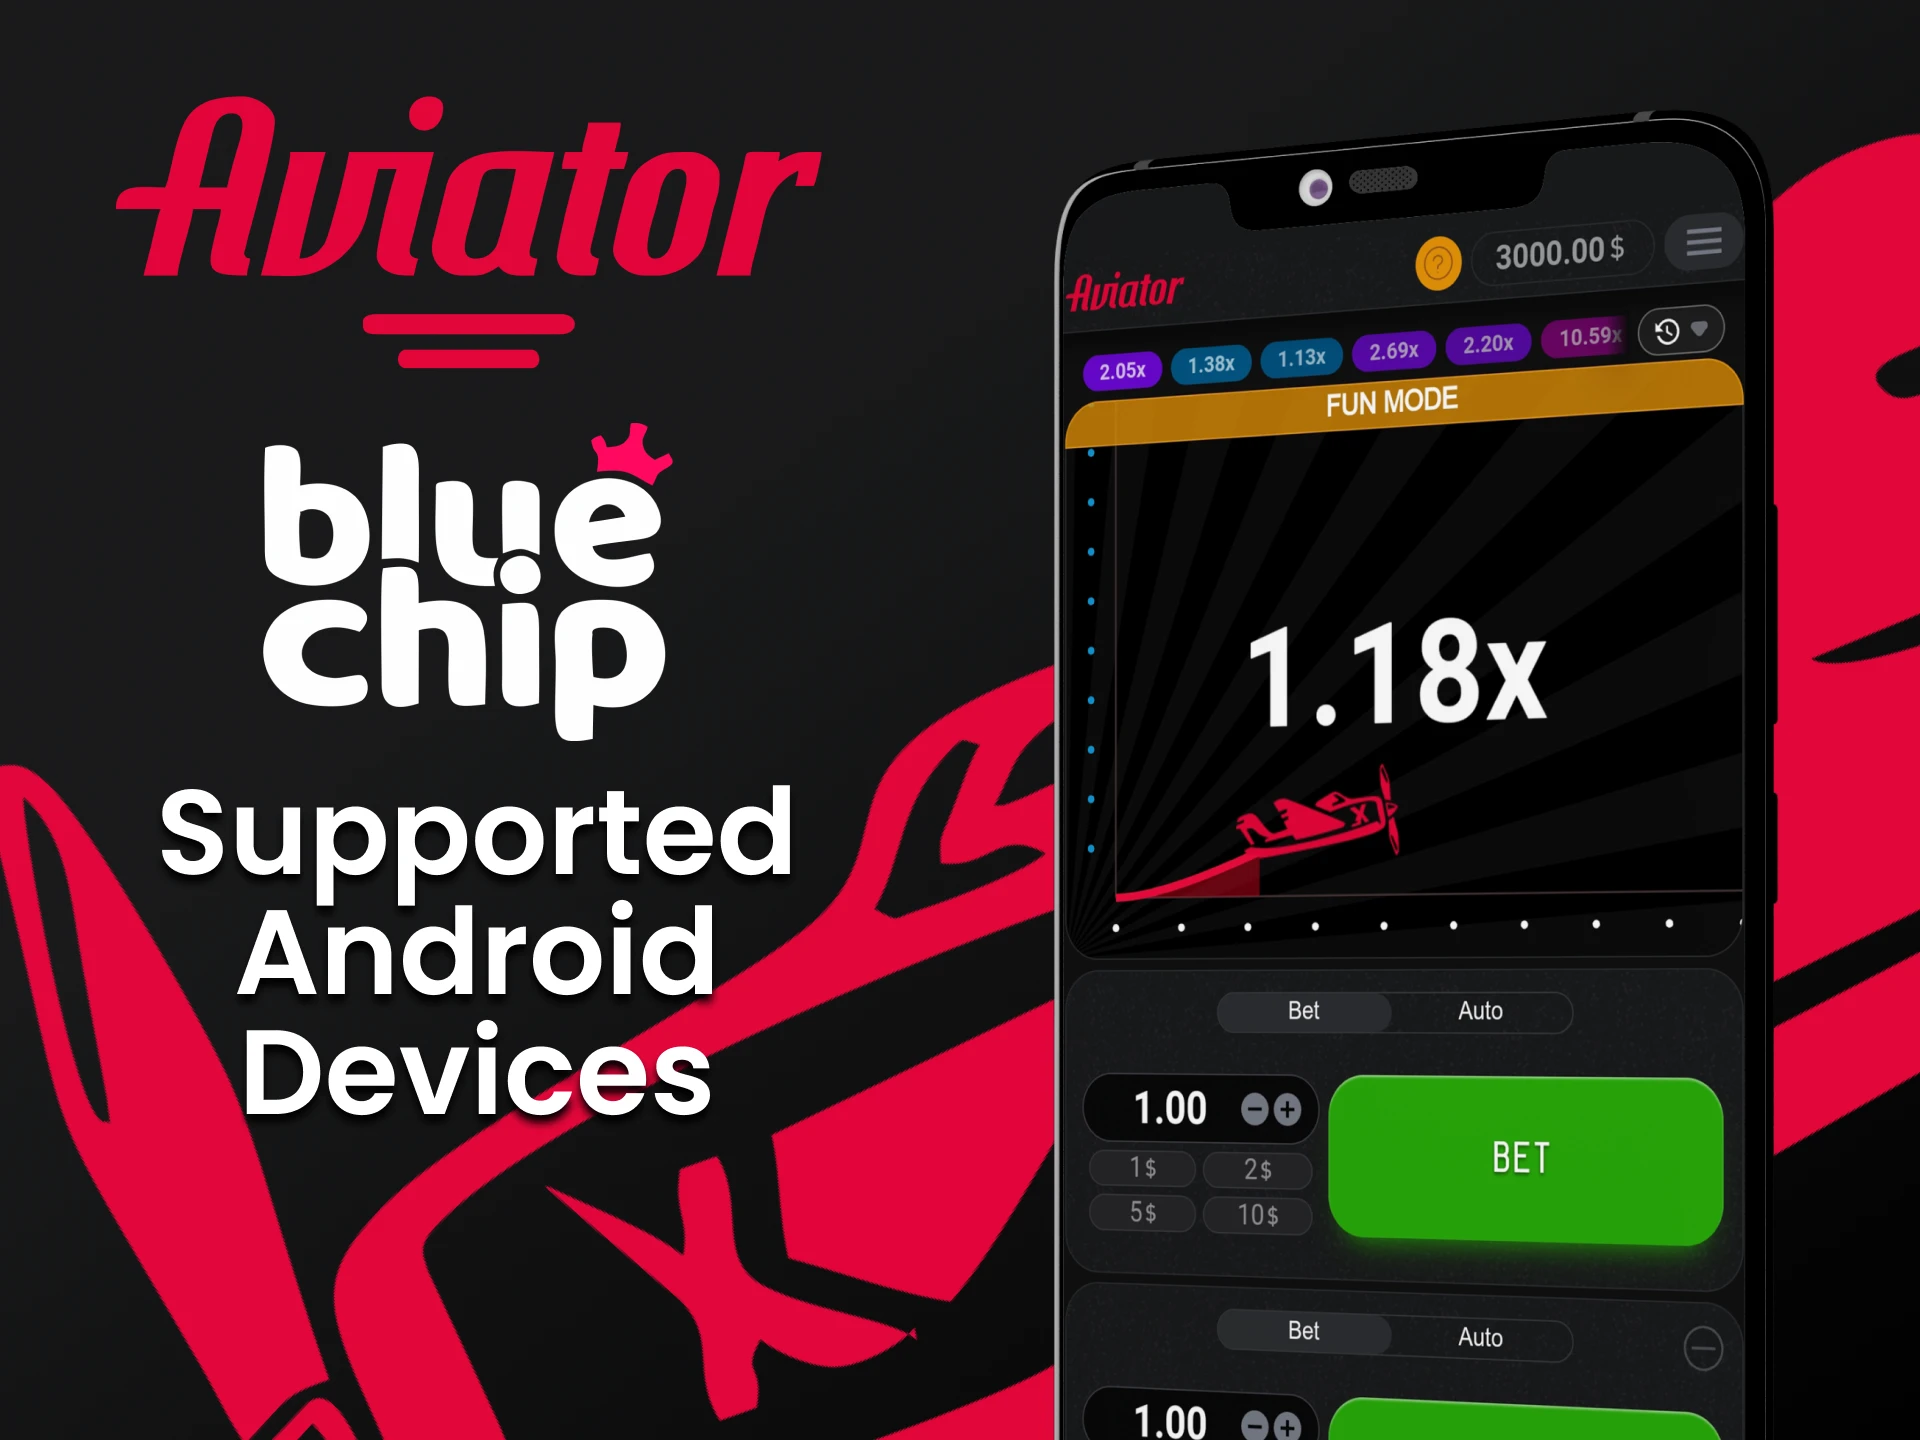 Play Aviator through the Bluechip app on your android device.